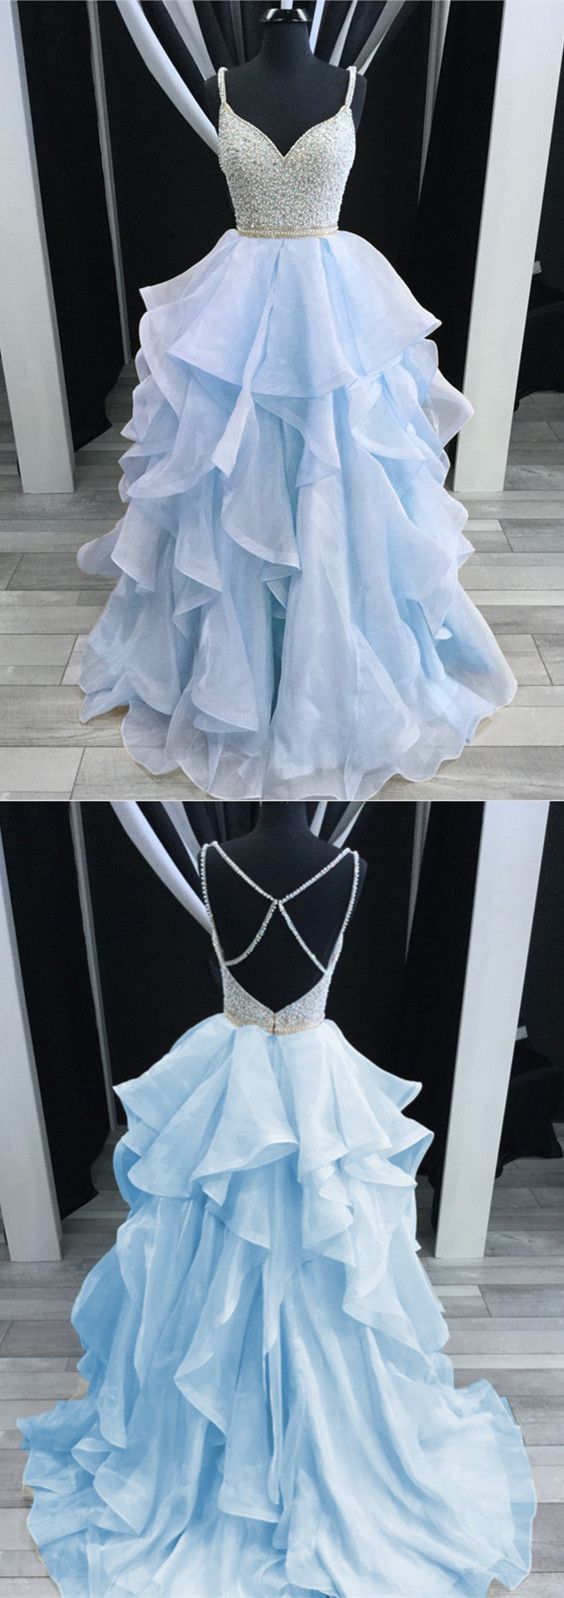 Baby Blue Prom Dresses Ballgowns Organza Ruffles V-Neck With Beaded And Cross Back